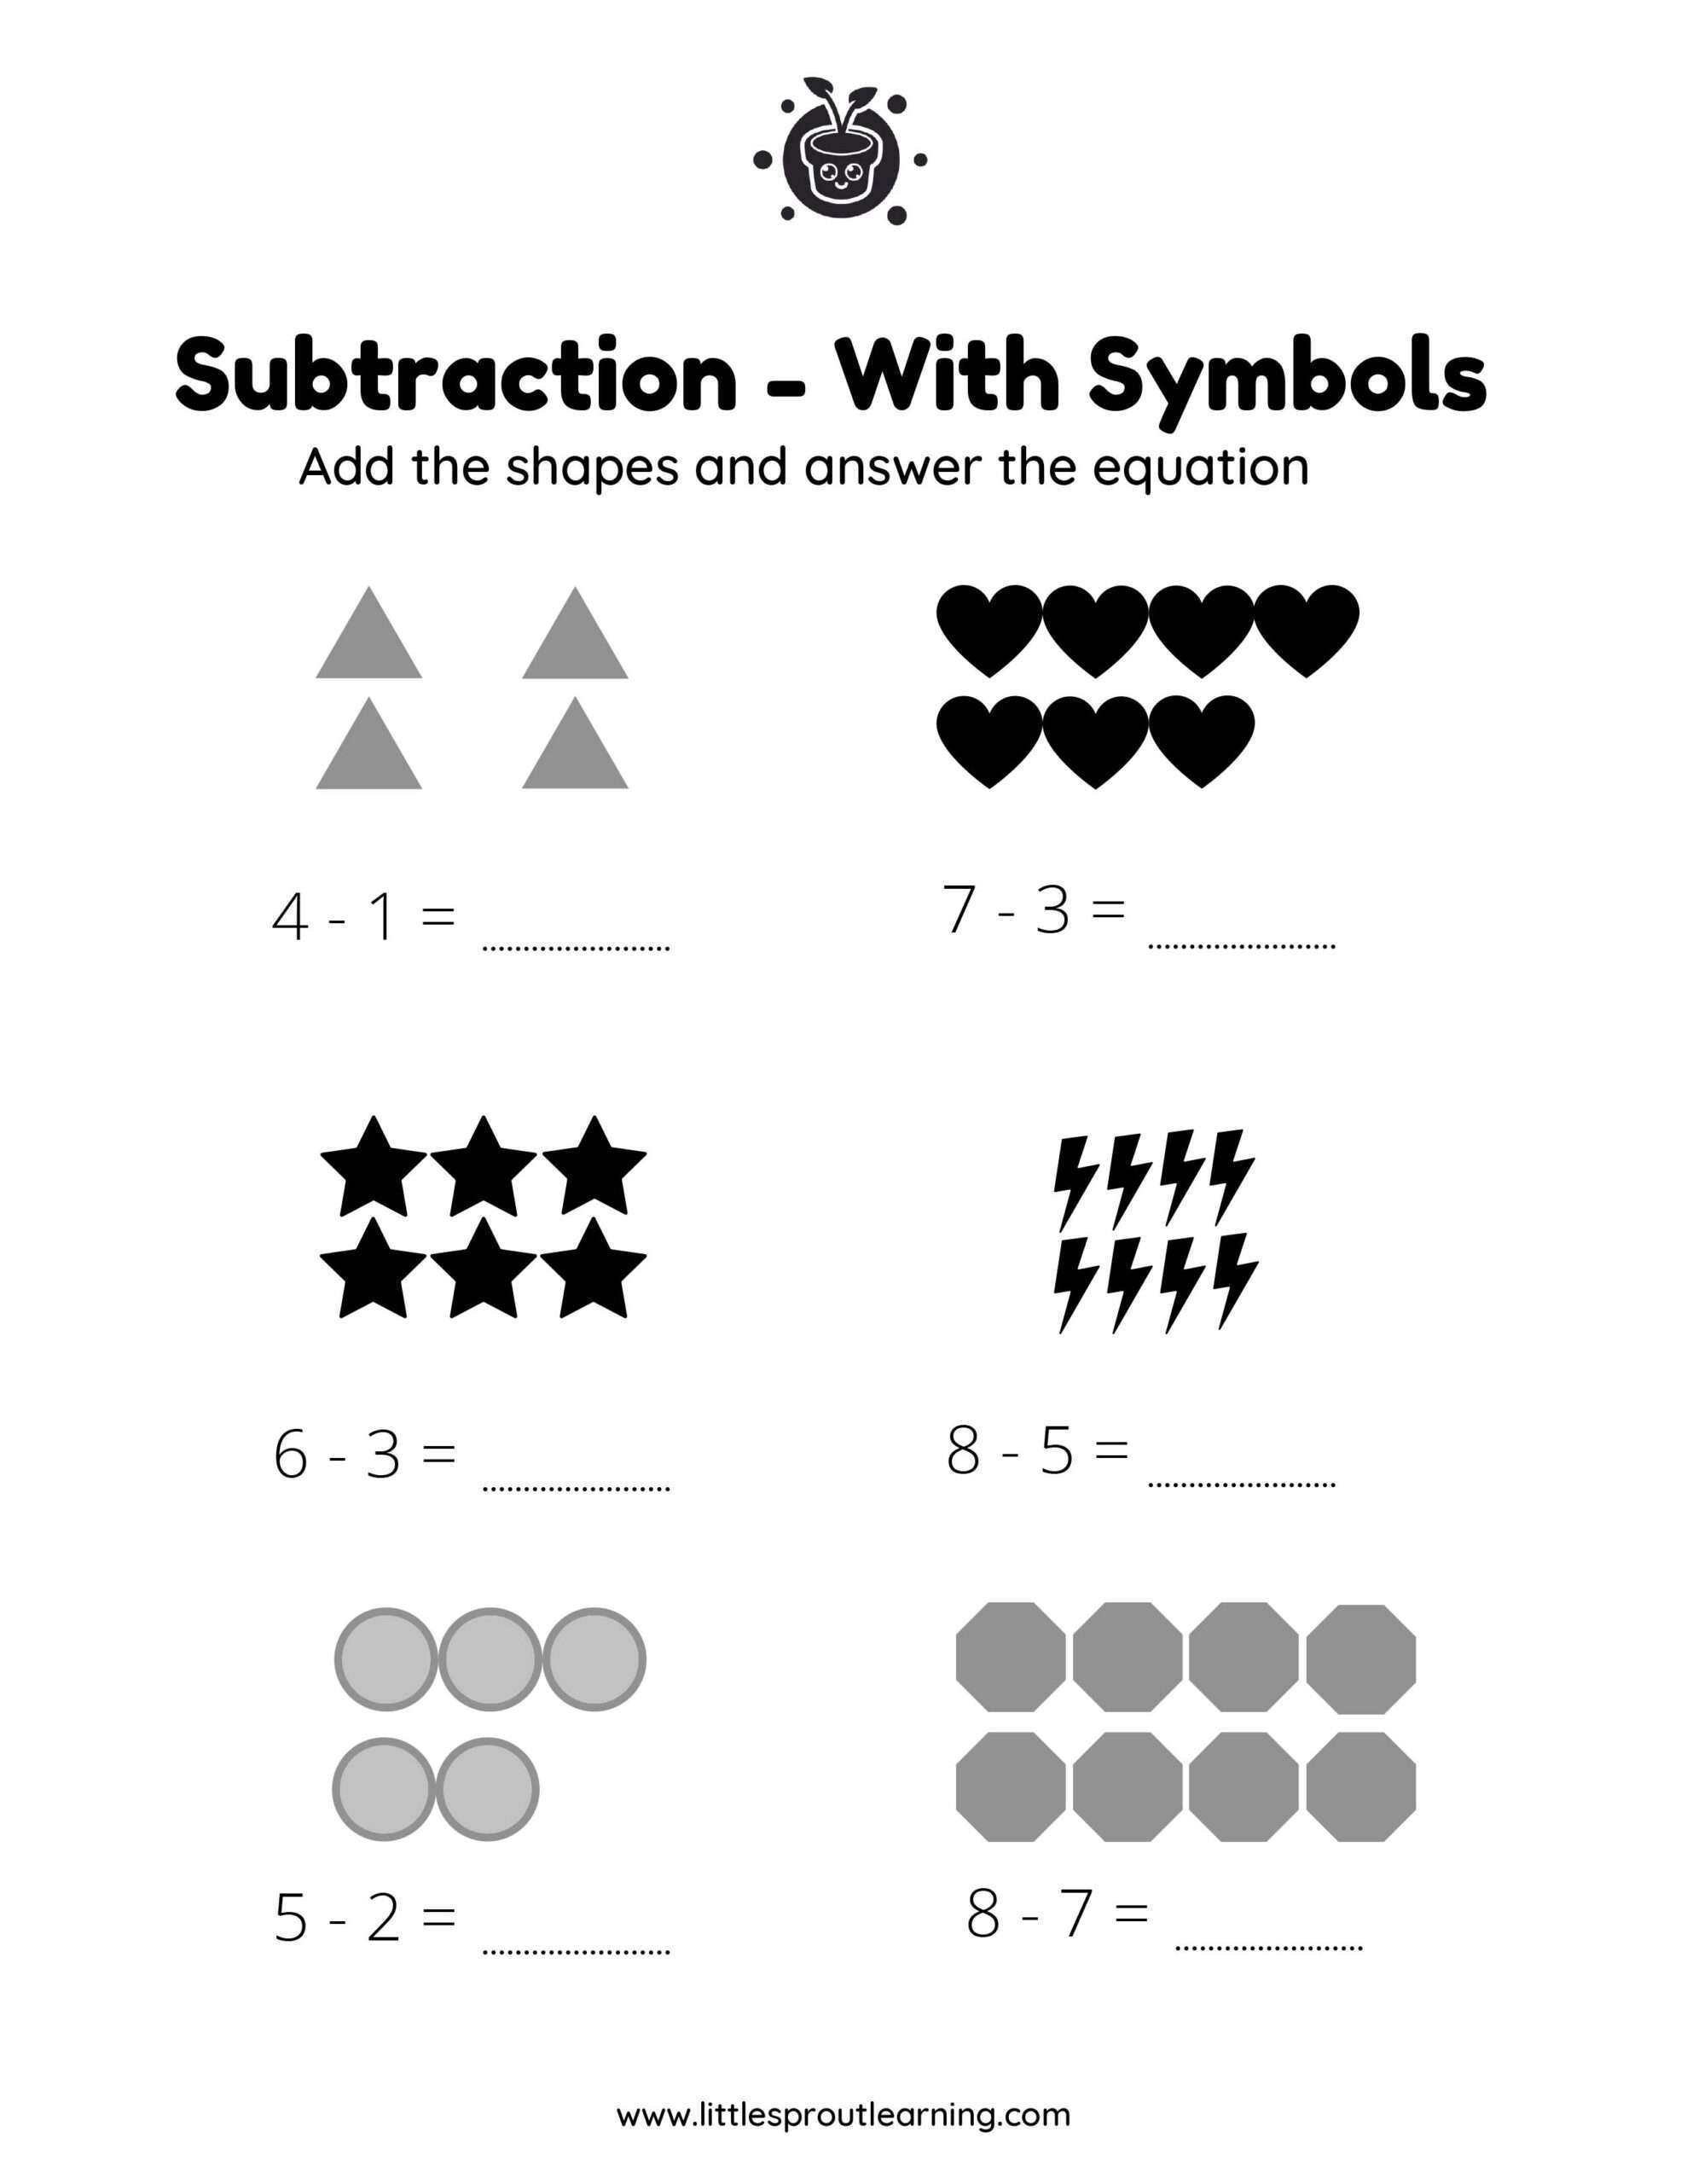 Subtraction With Symbols and Subtraction Single Digit